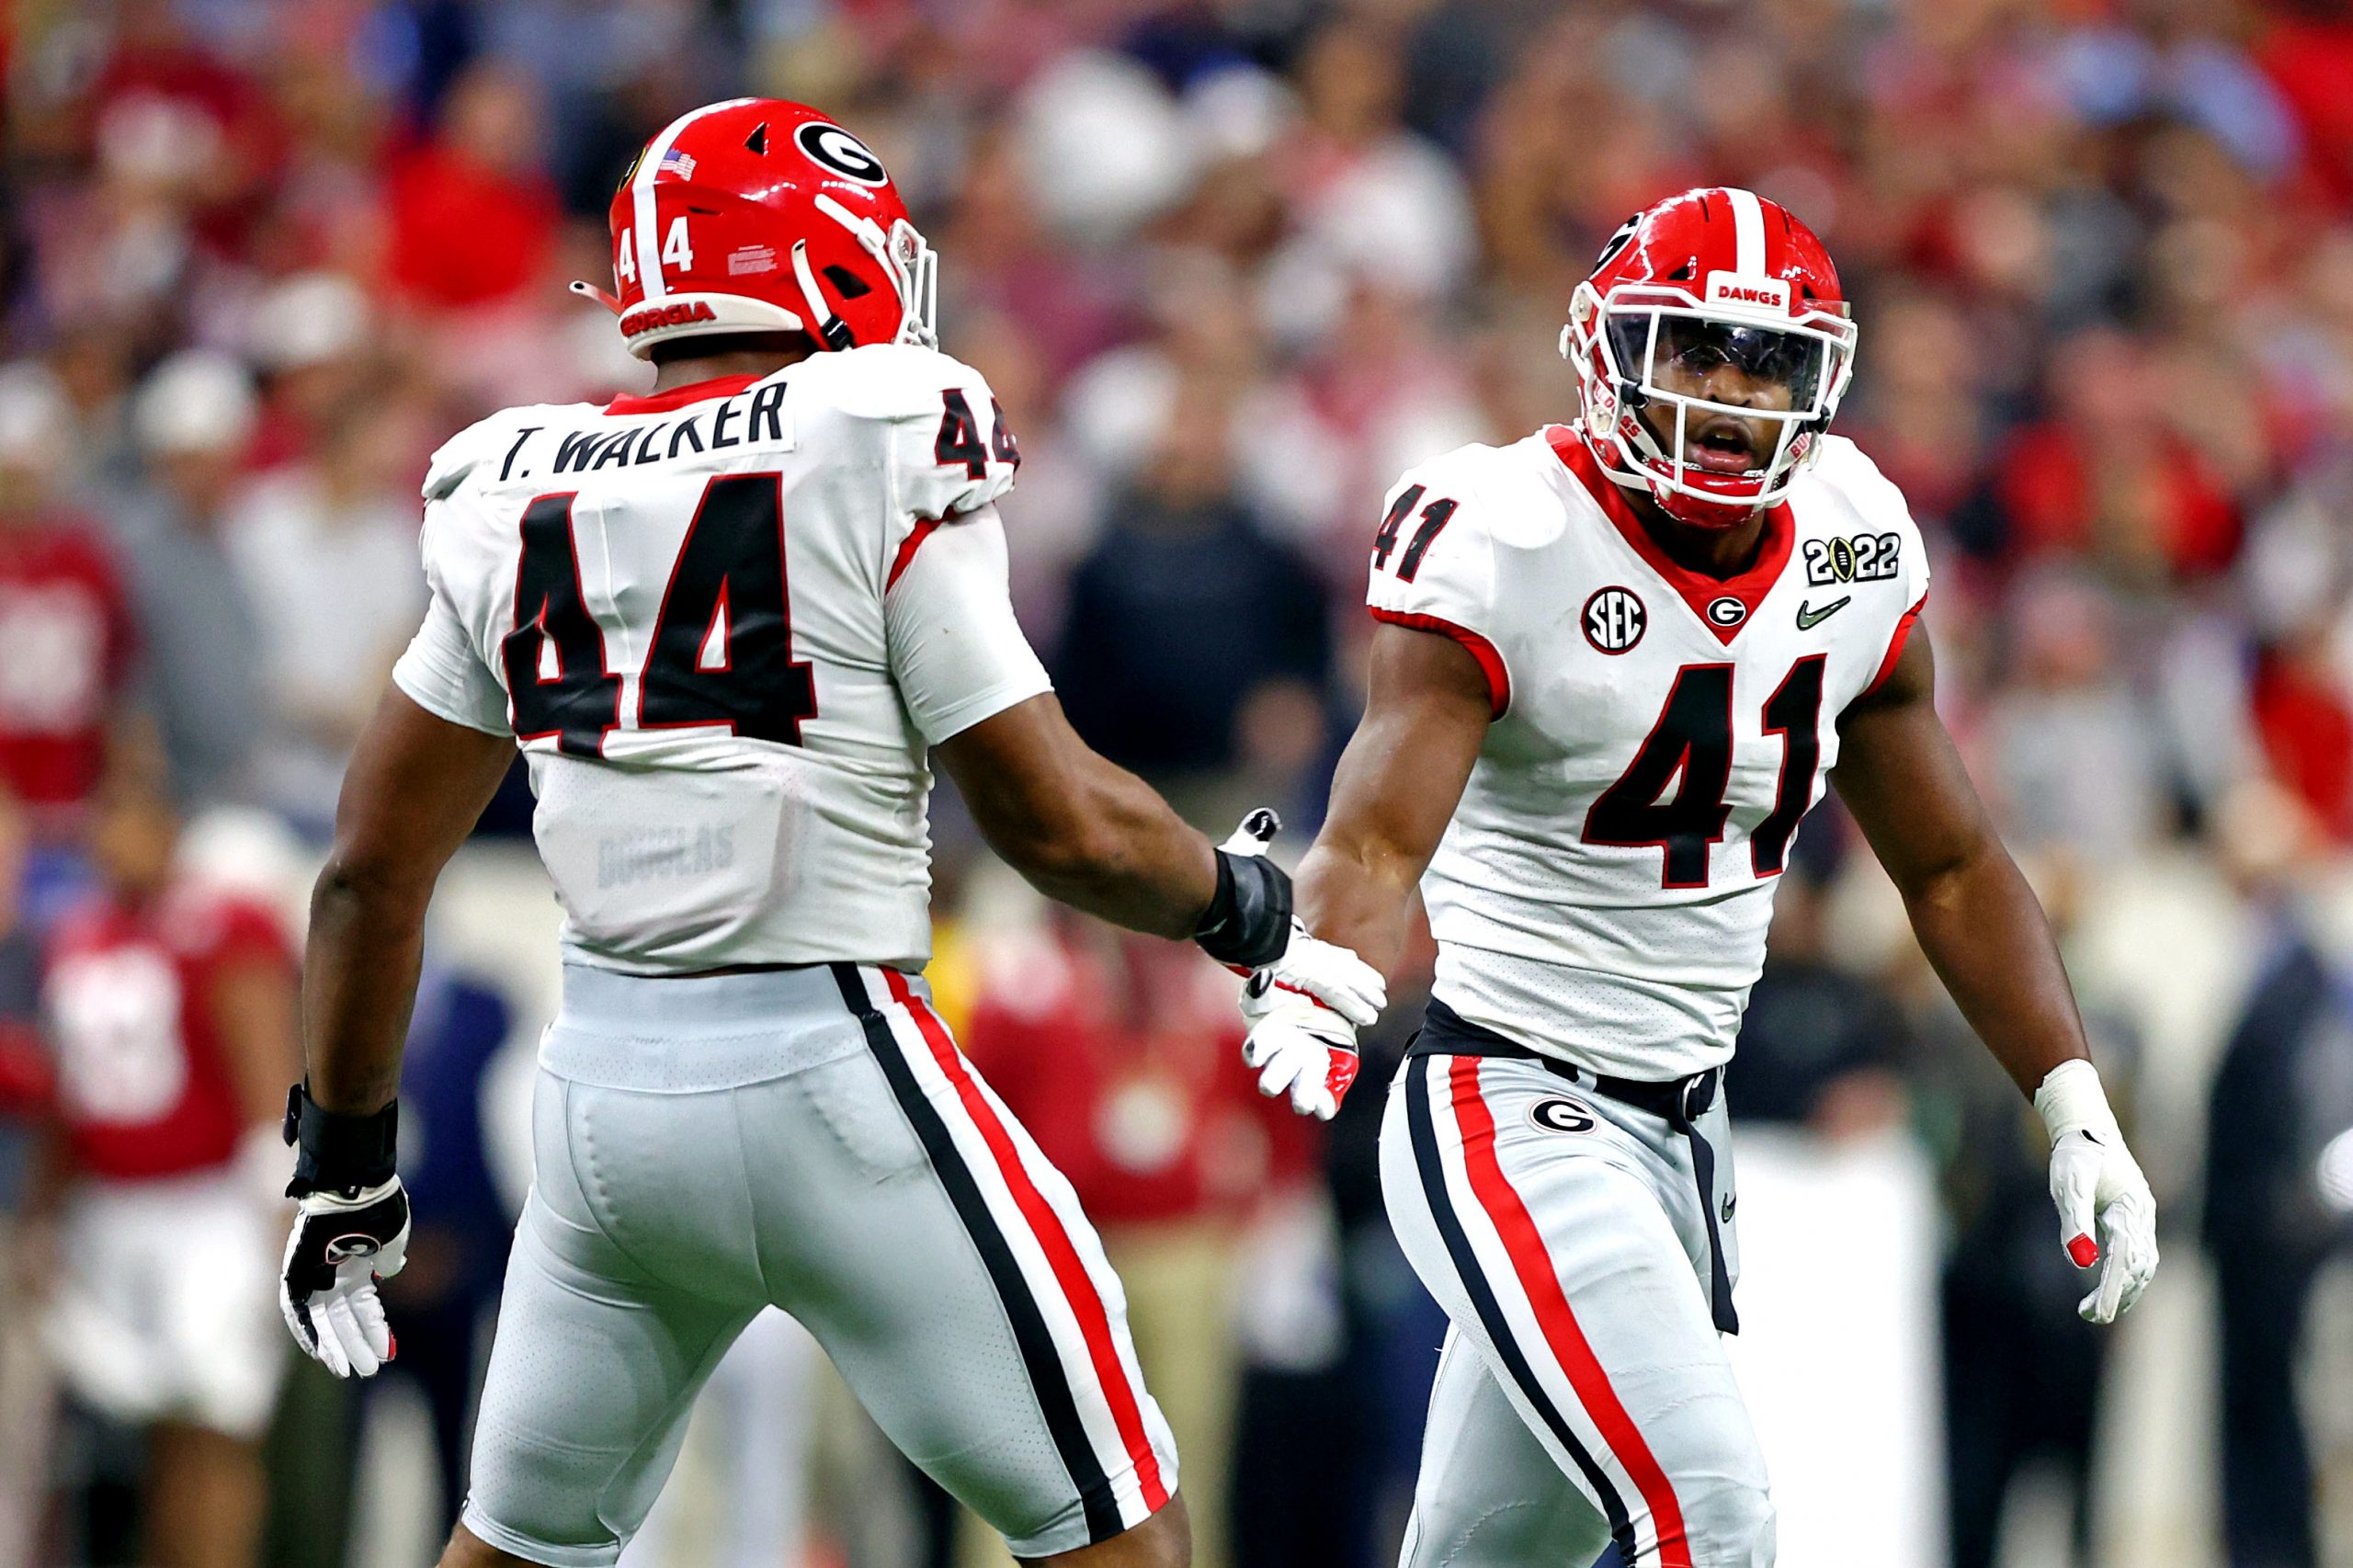 Georgia Bulldogs linebacker Channing Tindall (41) celebrates with Georgia Bulldogs defensive lineman Travon Walker (44) during the first half against the Alabama Crimson Tide in the 2022 CFP college football national championship game at Lucas Oil Stadium.